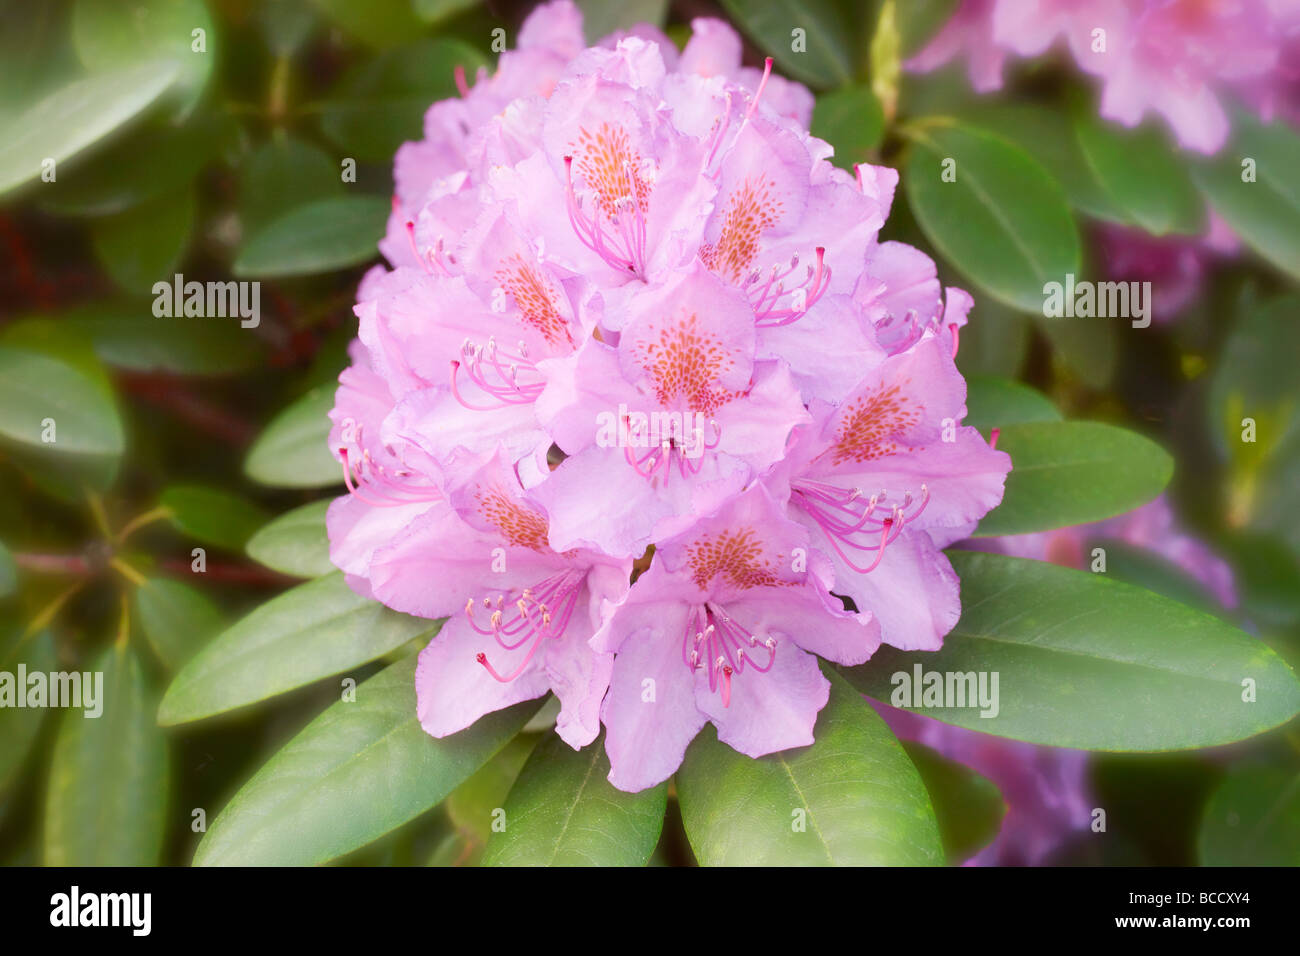 Rhododendron's flower Stock Photo